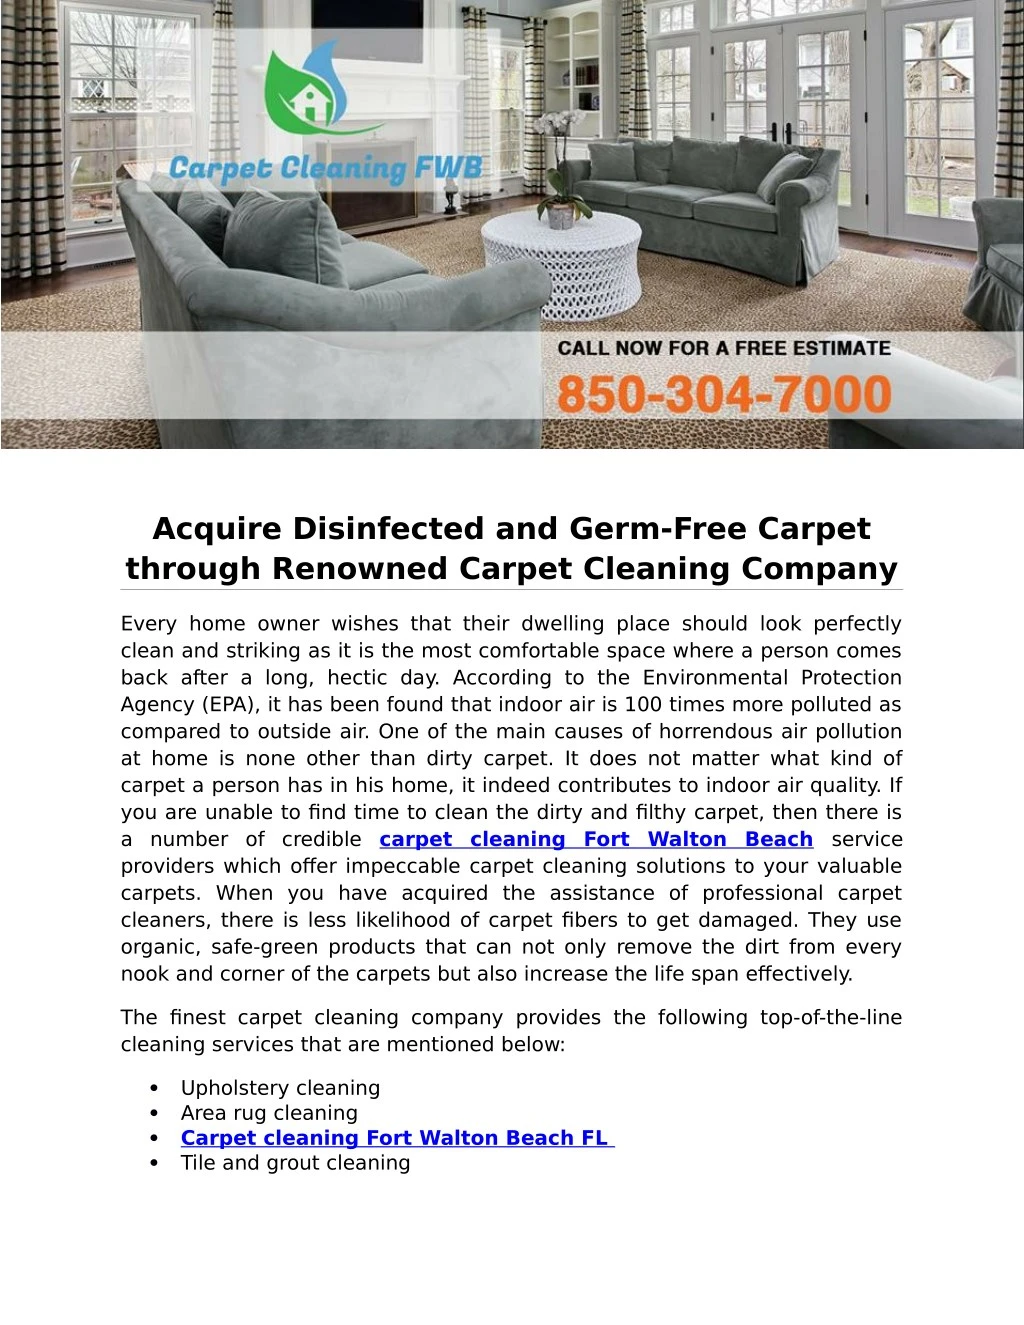 acquire disinfected and germ free carpet through